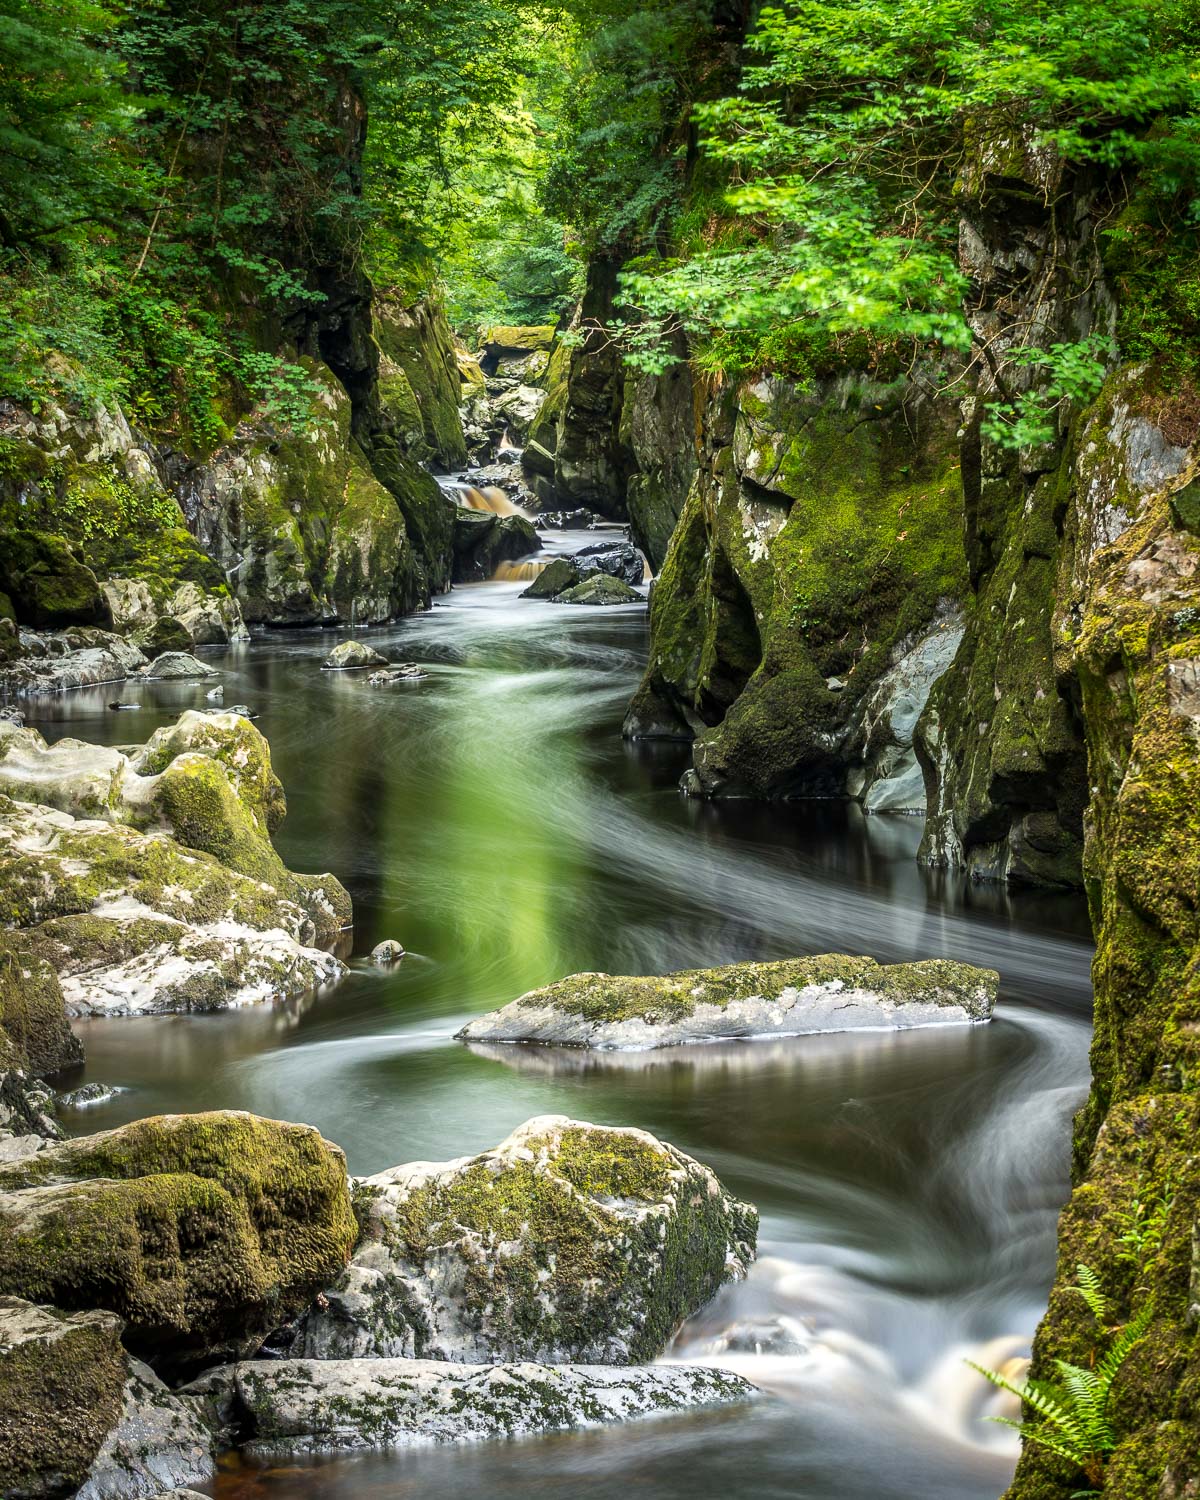 Long exposure of water flowing through a small, green rocky valley.